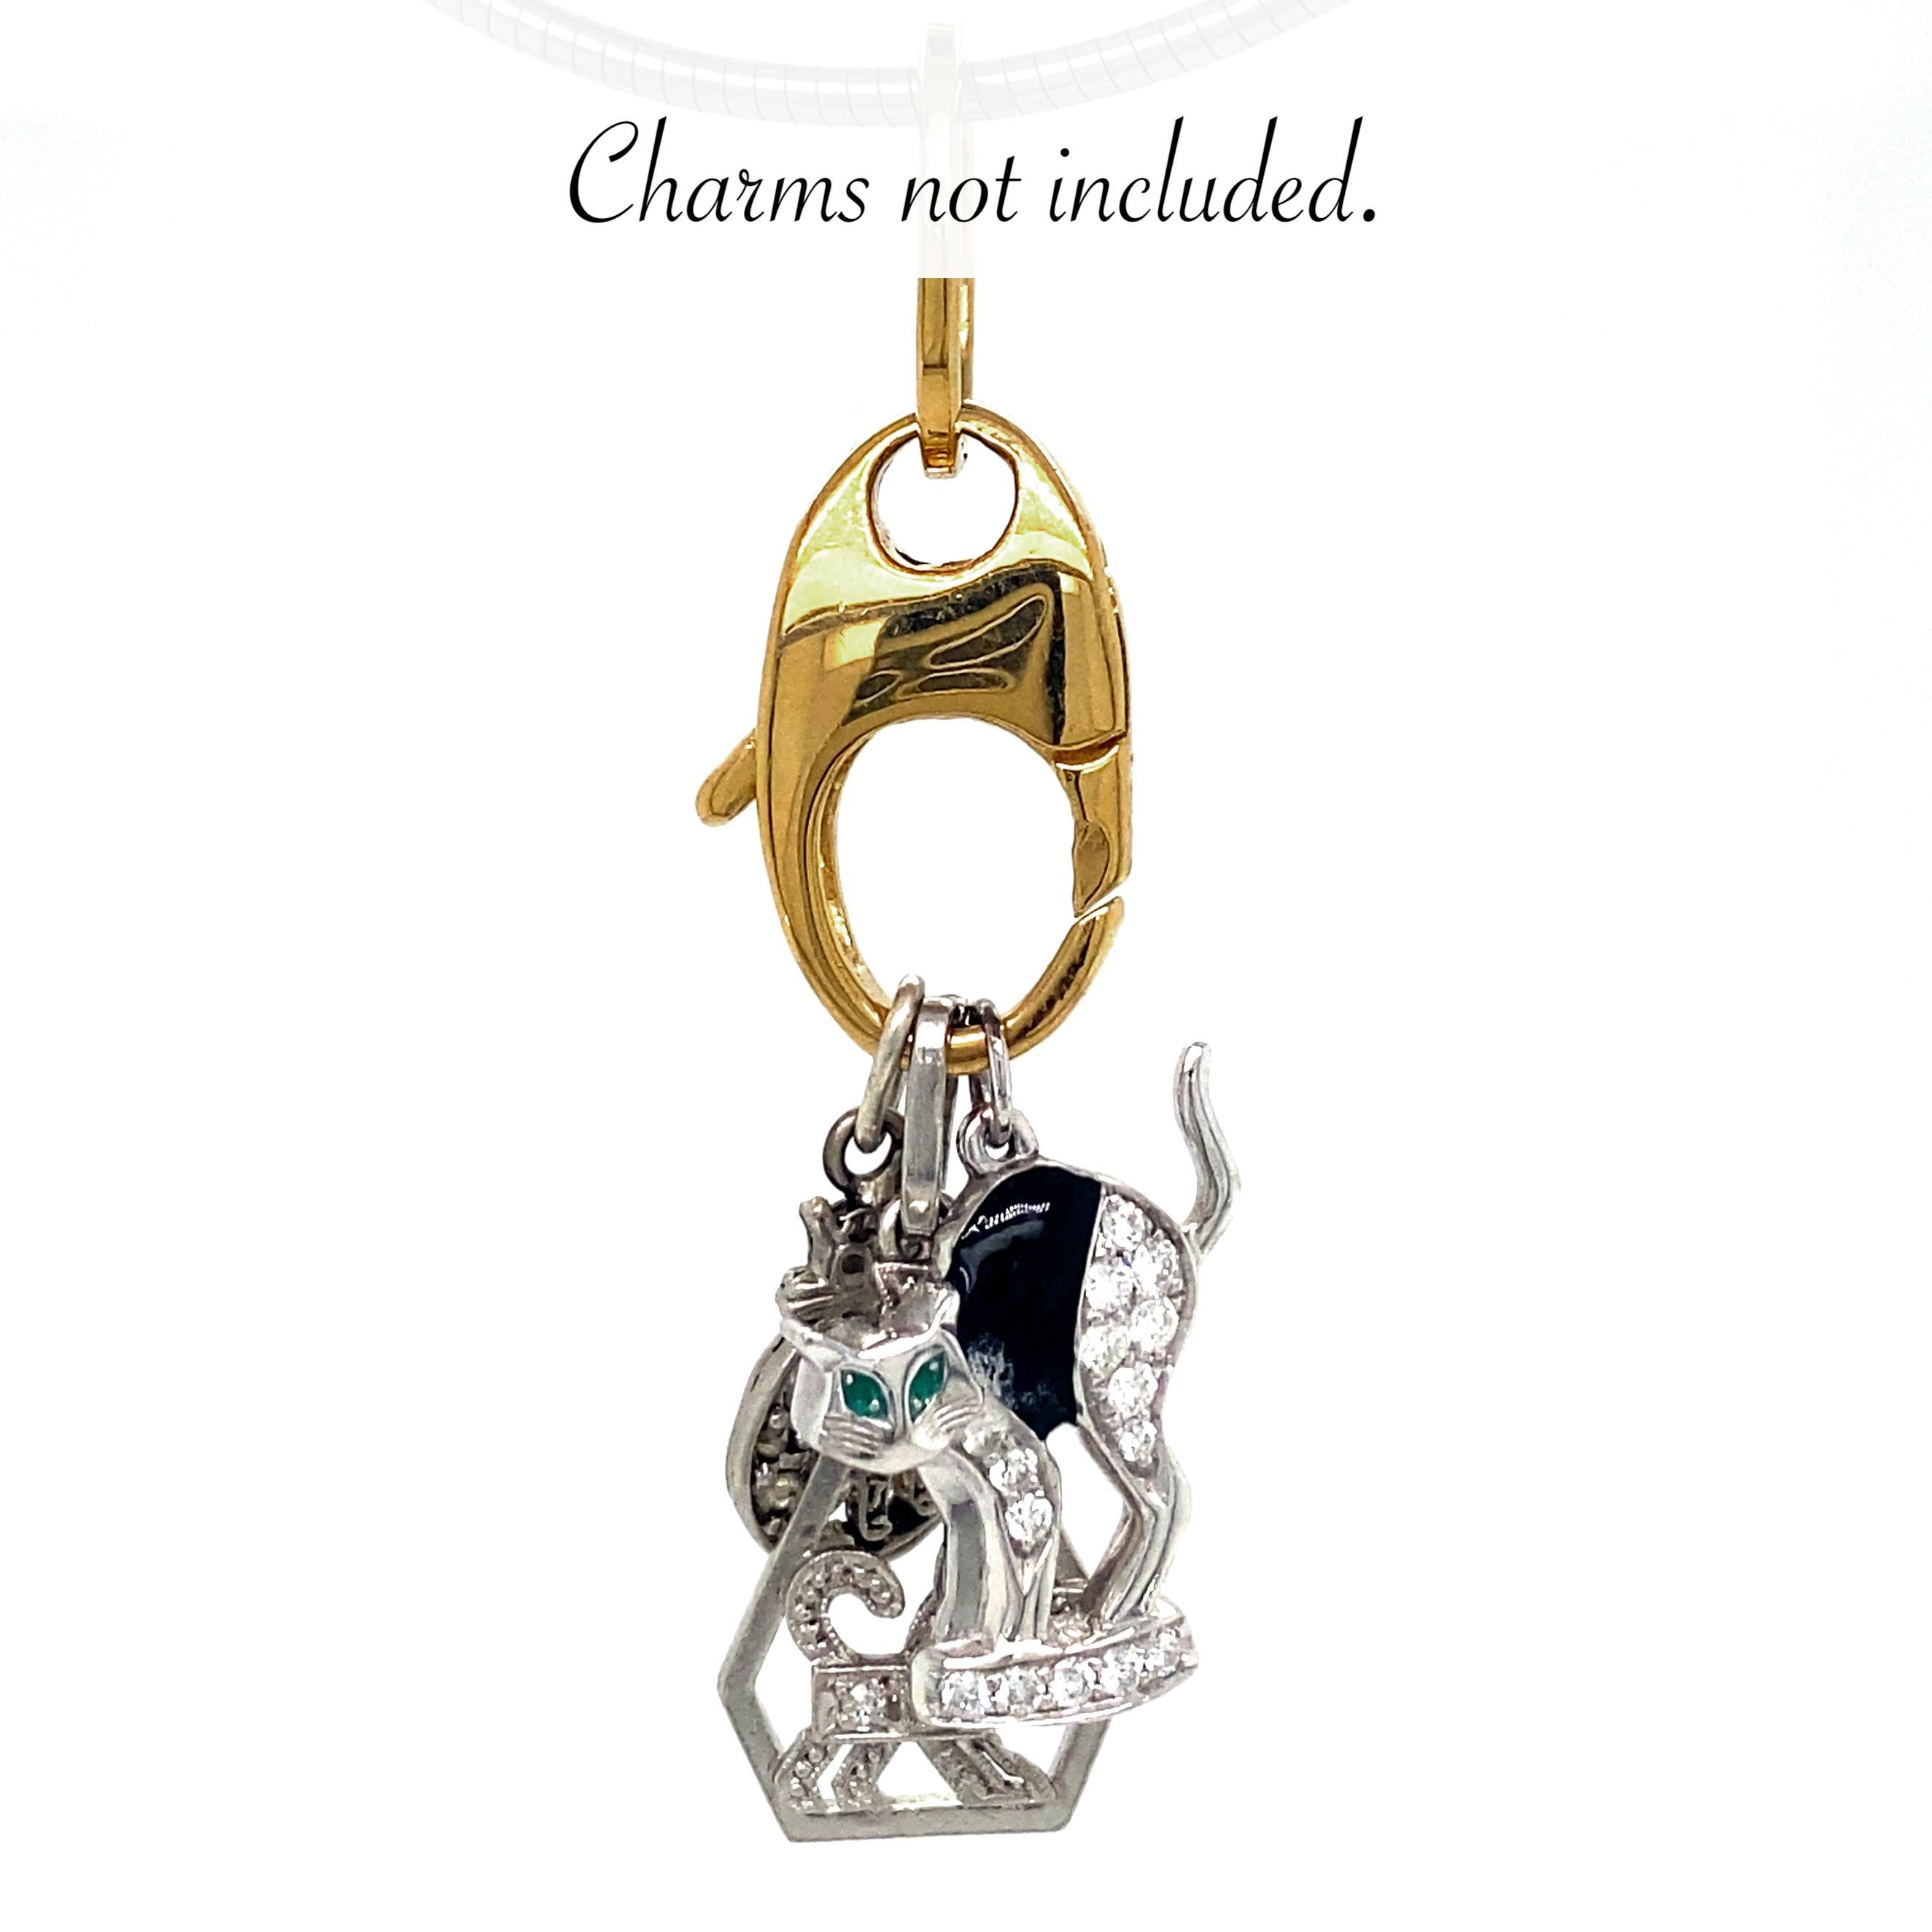 Contemporary Lobster Charm Holder Pendant in 18 Karat Gold with Steel & Gold Omega Chain